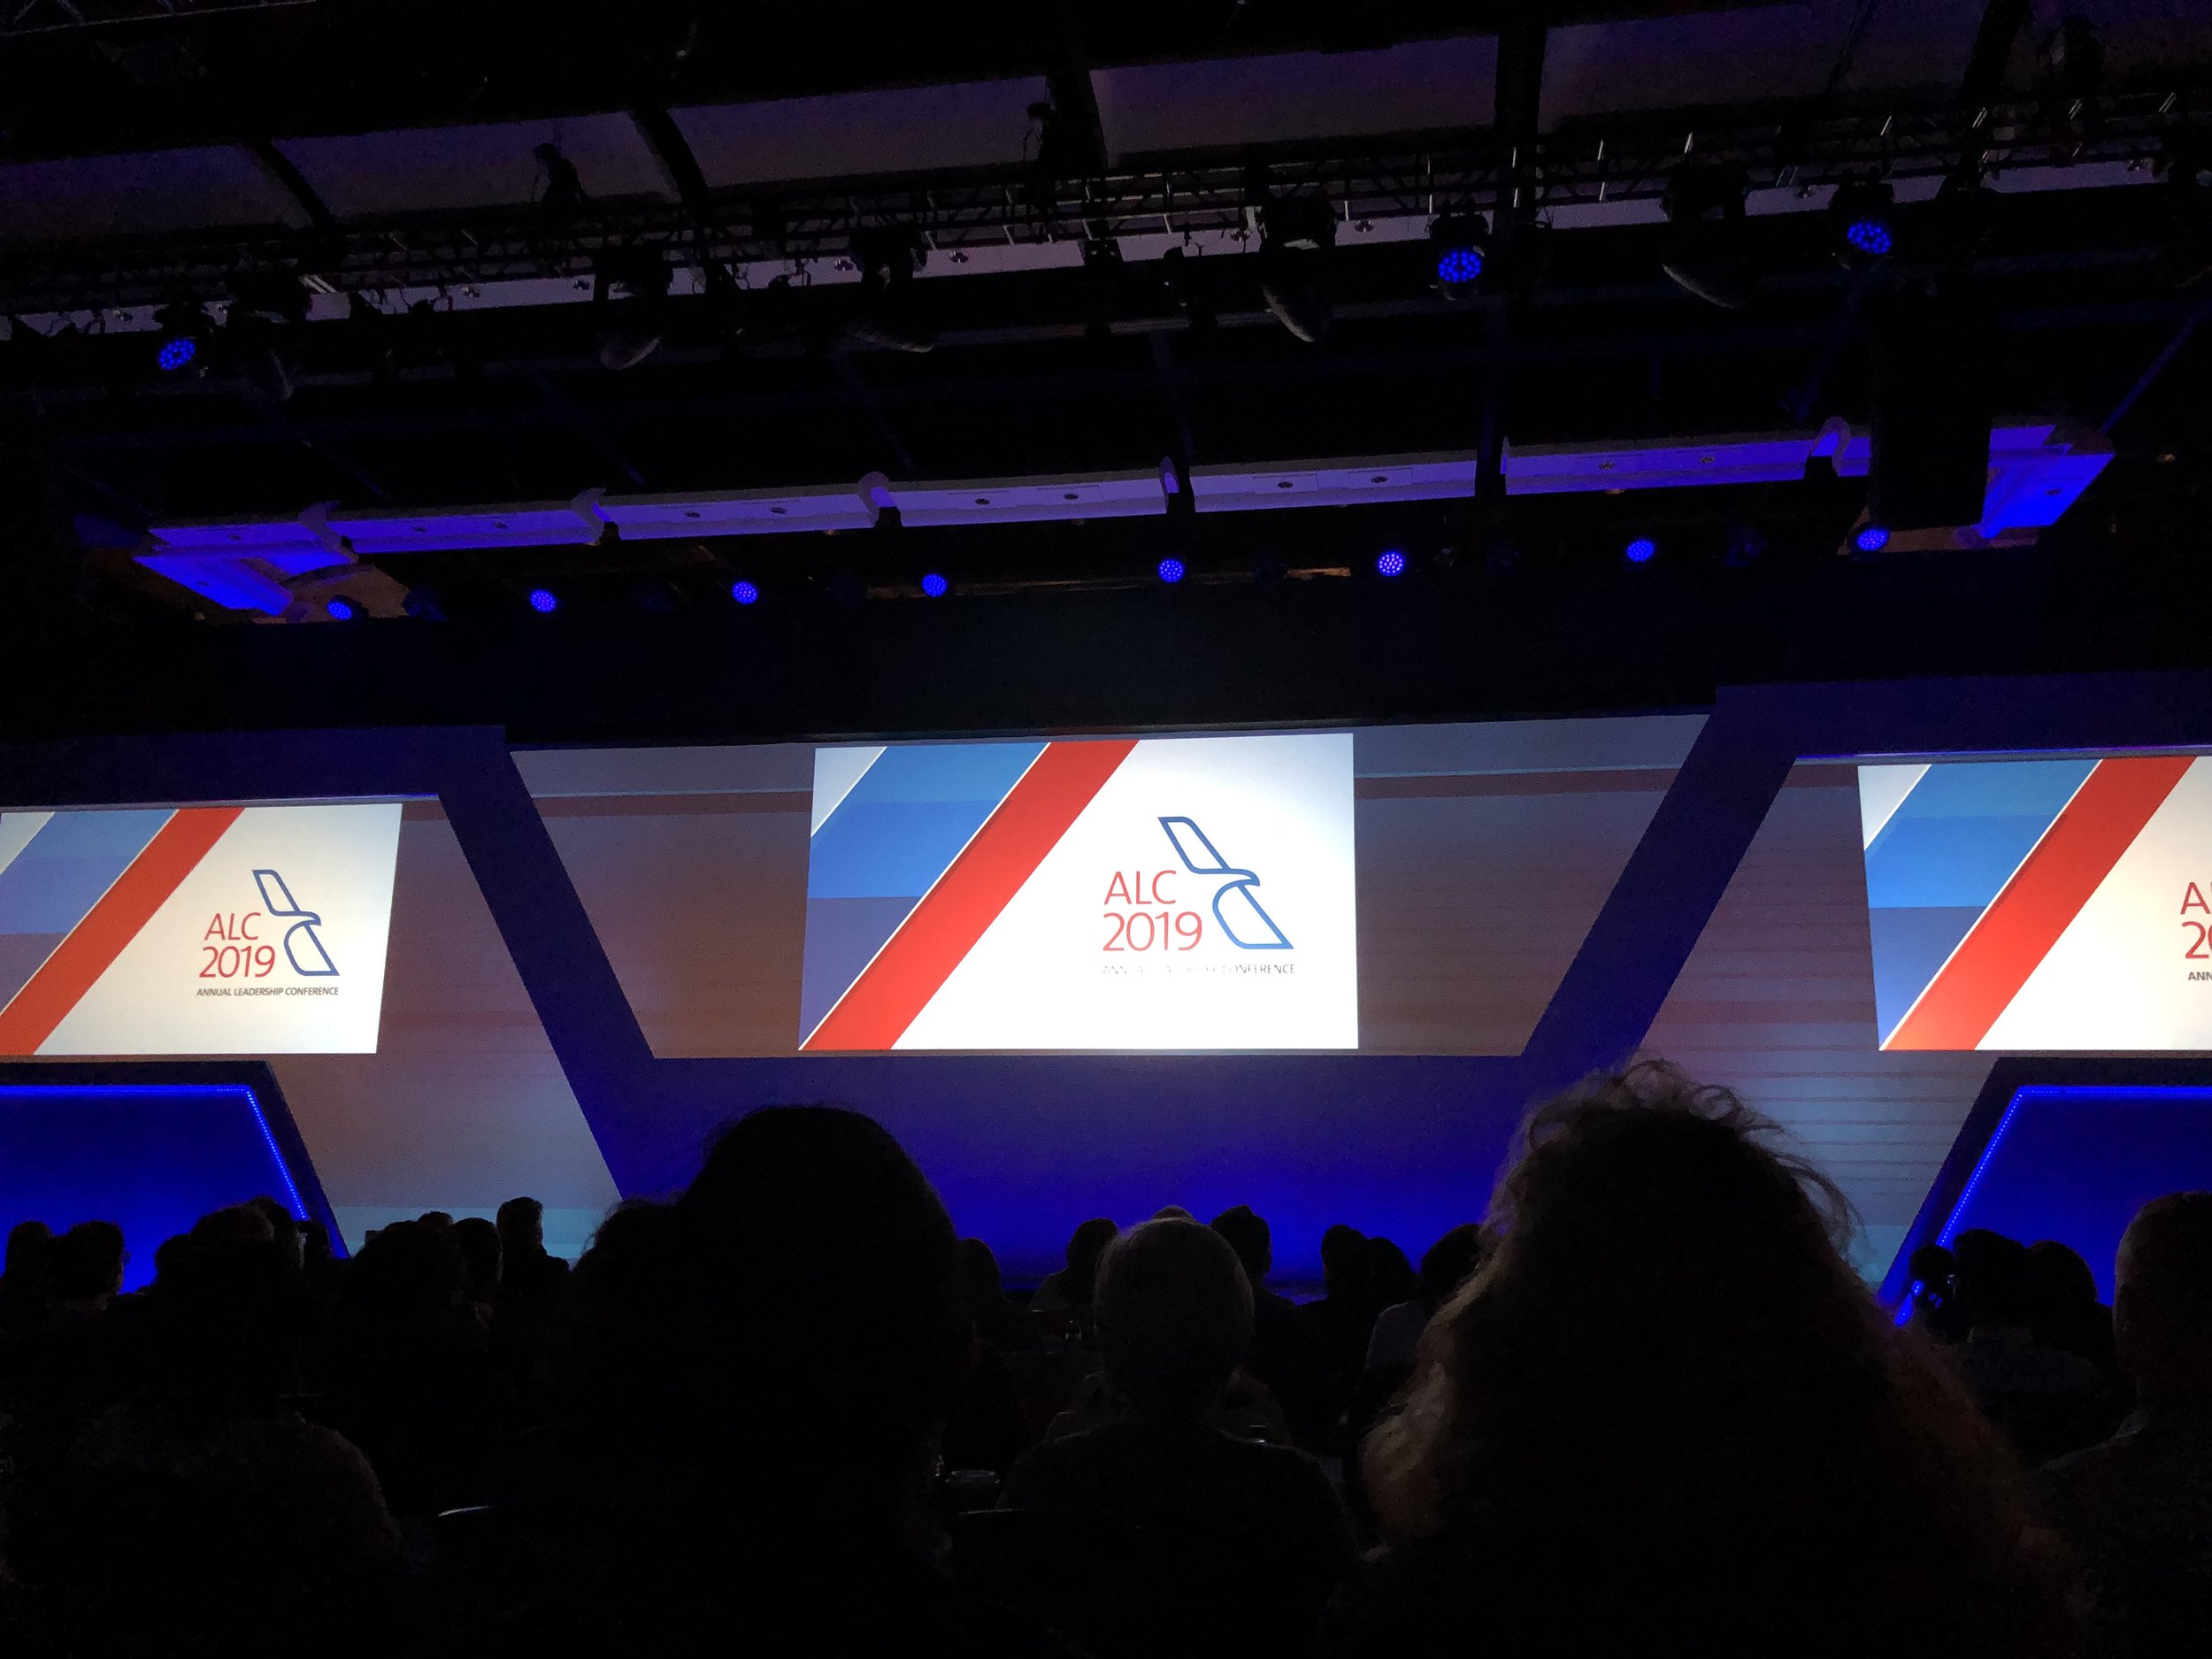 American Airlines ALC Conference